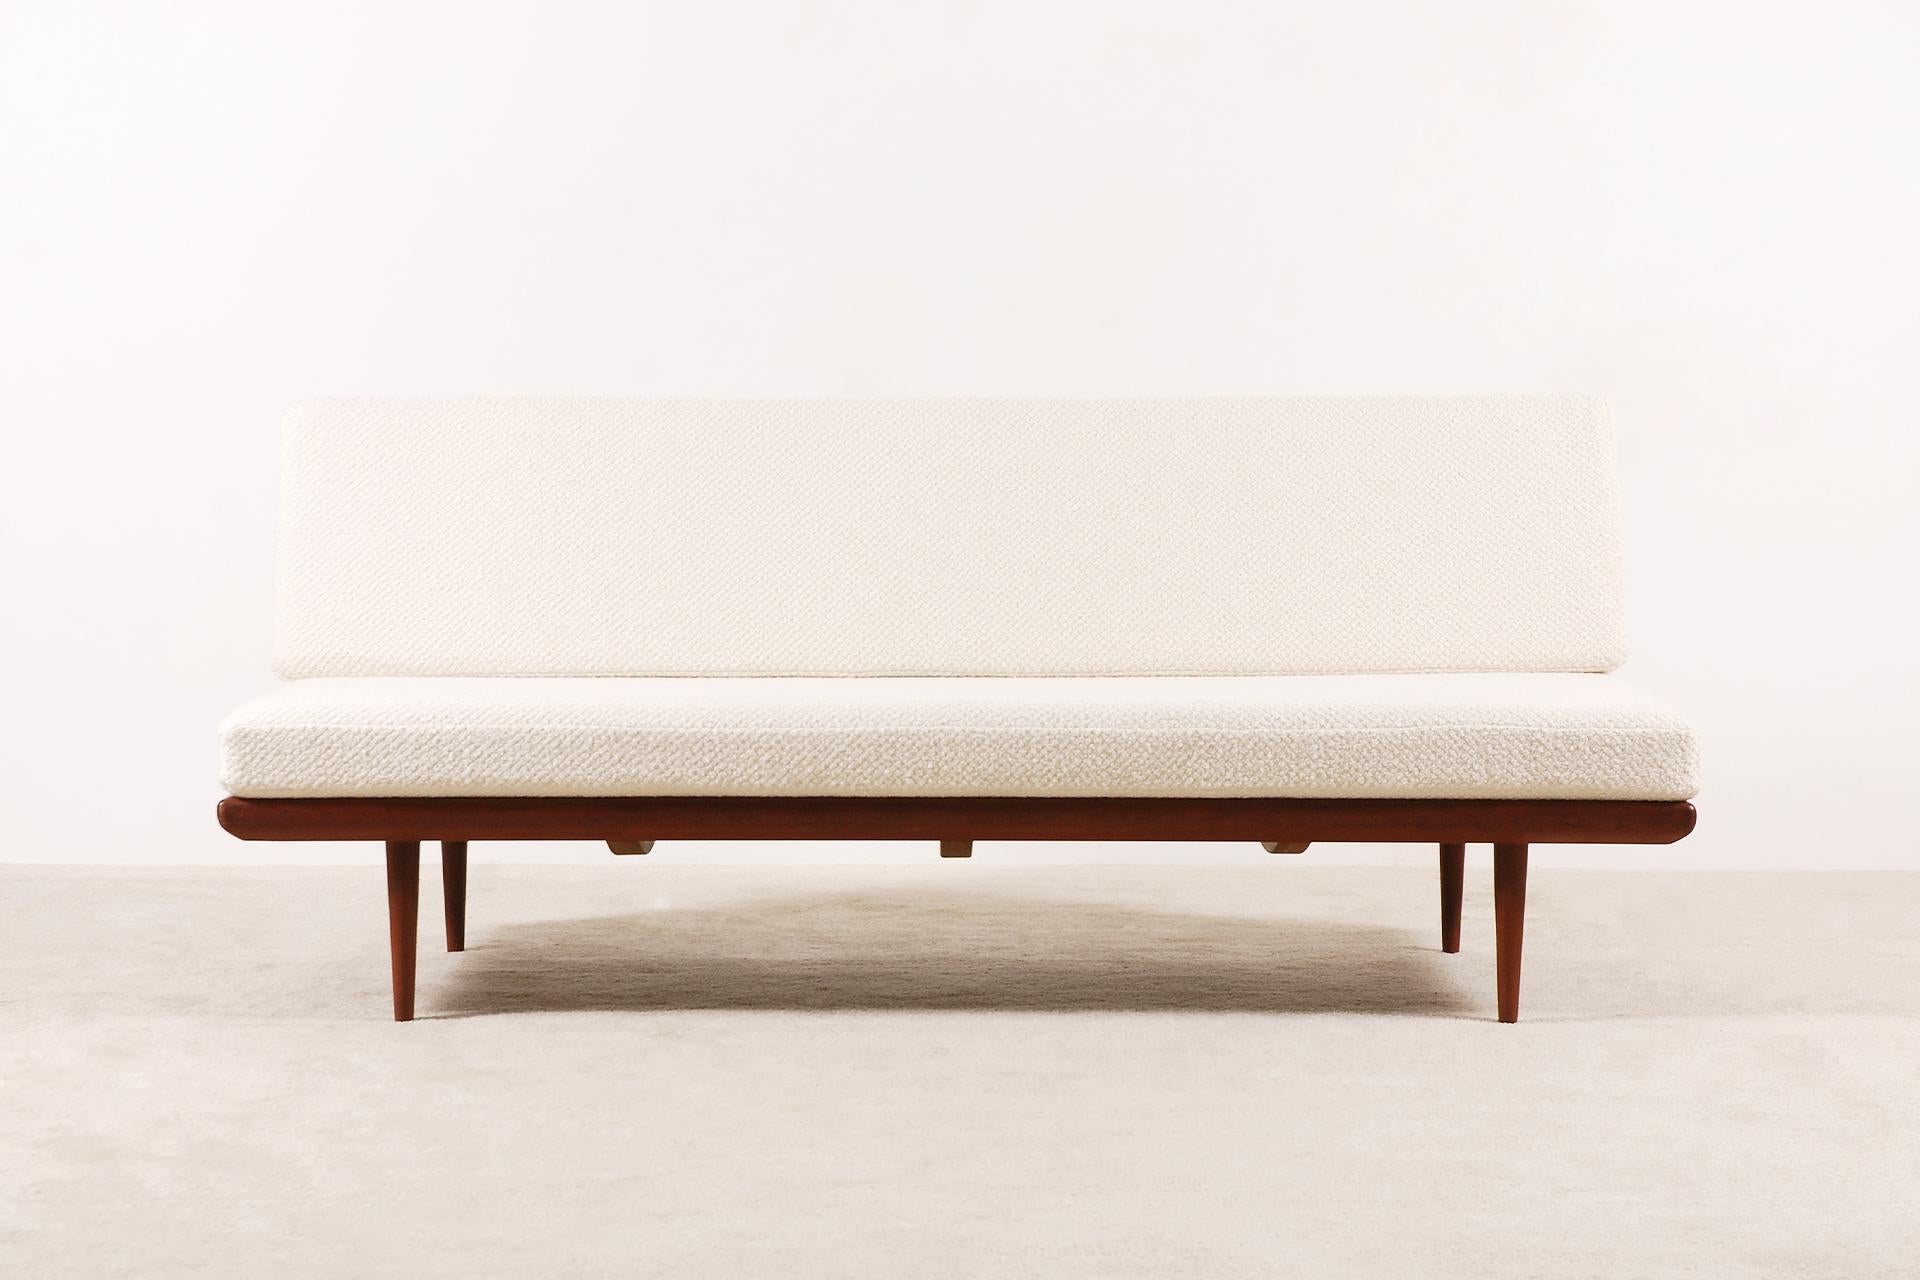 Nice 3-seat daybed / sofa designed by Peter Hvidt & Orla Mølgaard-Nielsen.
Model FD-417 also known as the Minerva produced by the Danish manufacturer France & Son, 1960s.

This daybed has been fully restored and newly upholstered in the